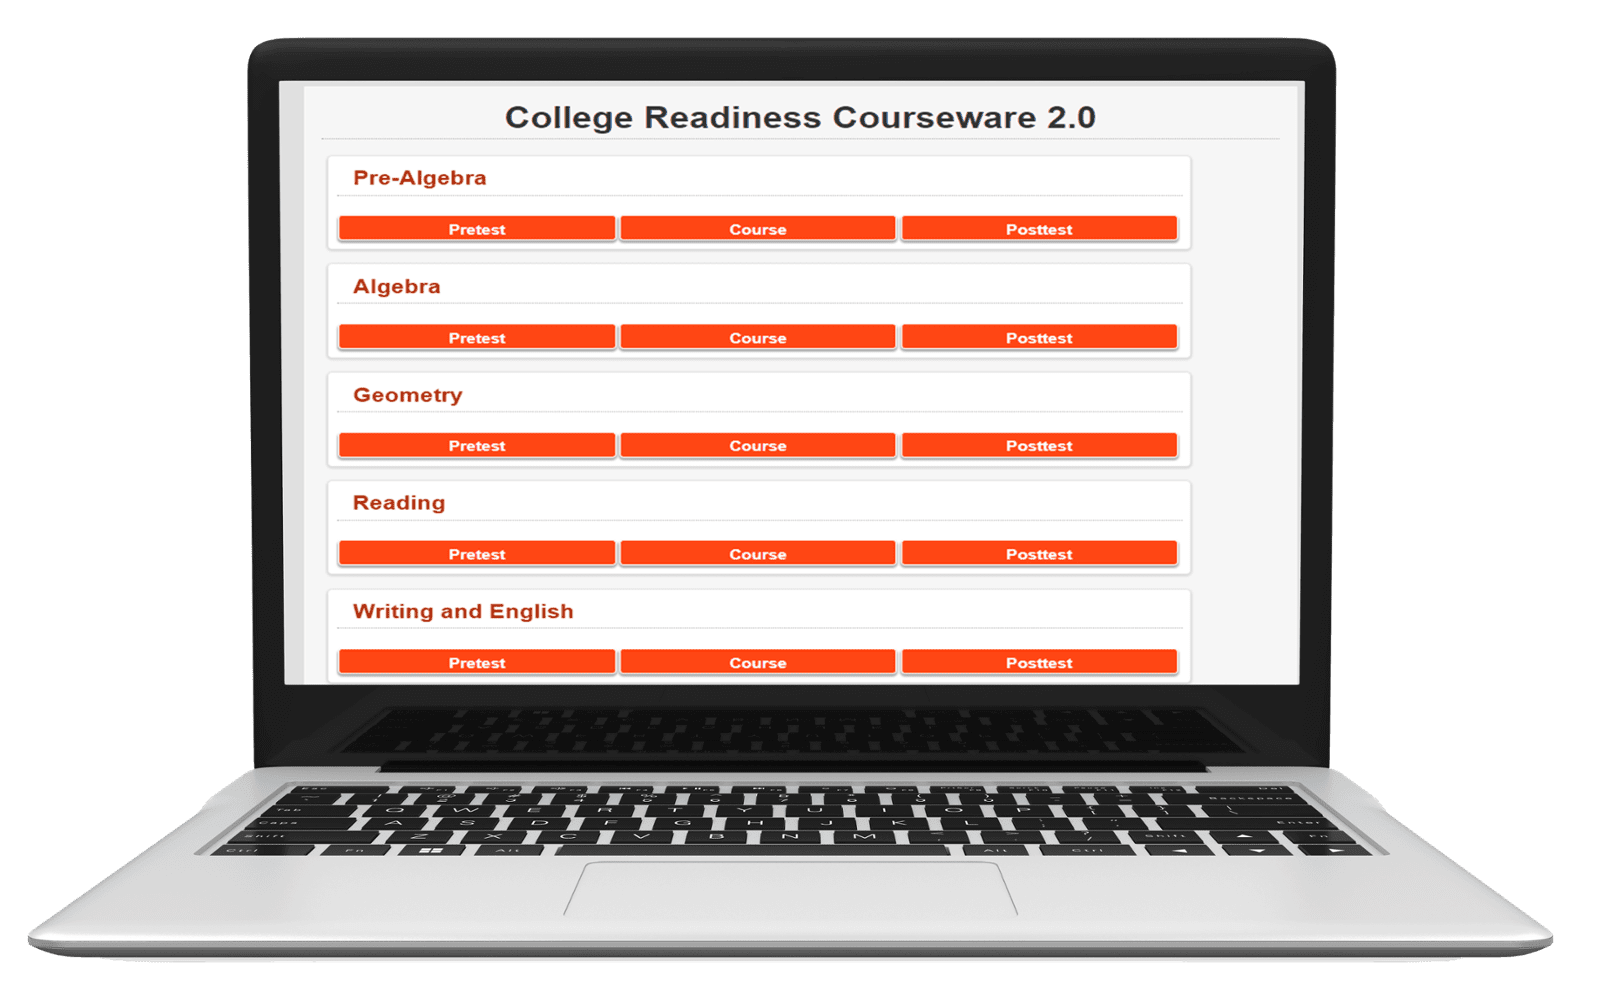 Image of the College Readiness Courseware home screen with all five modules displayed